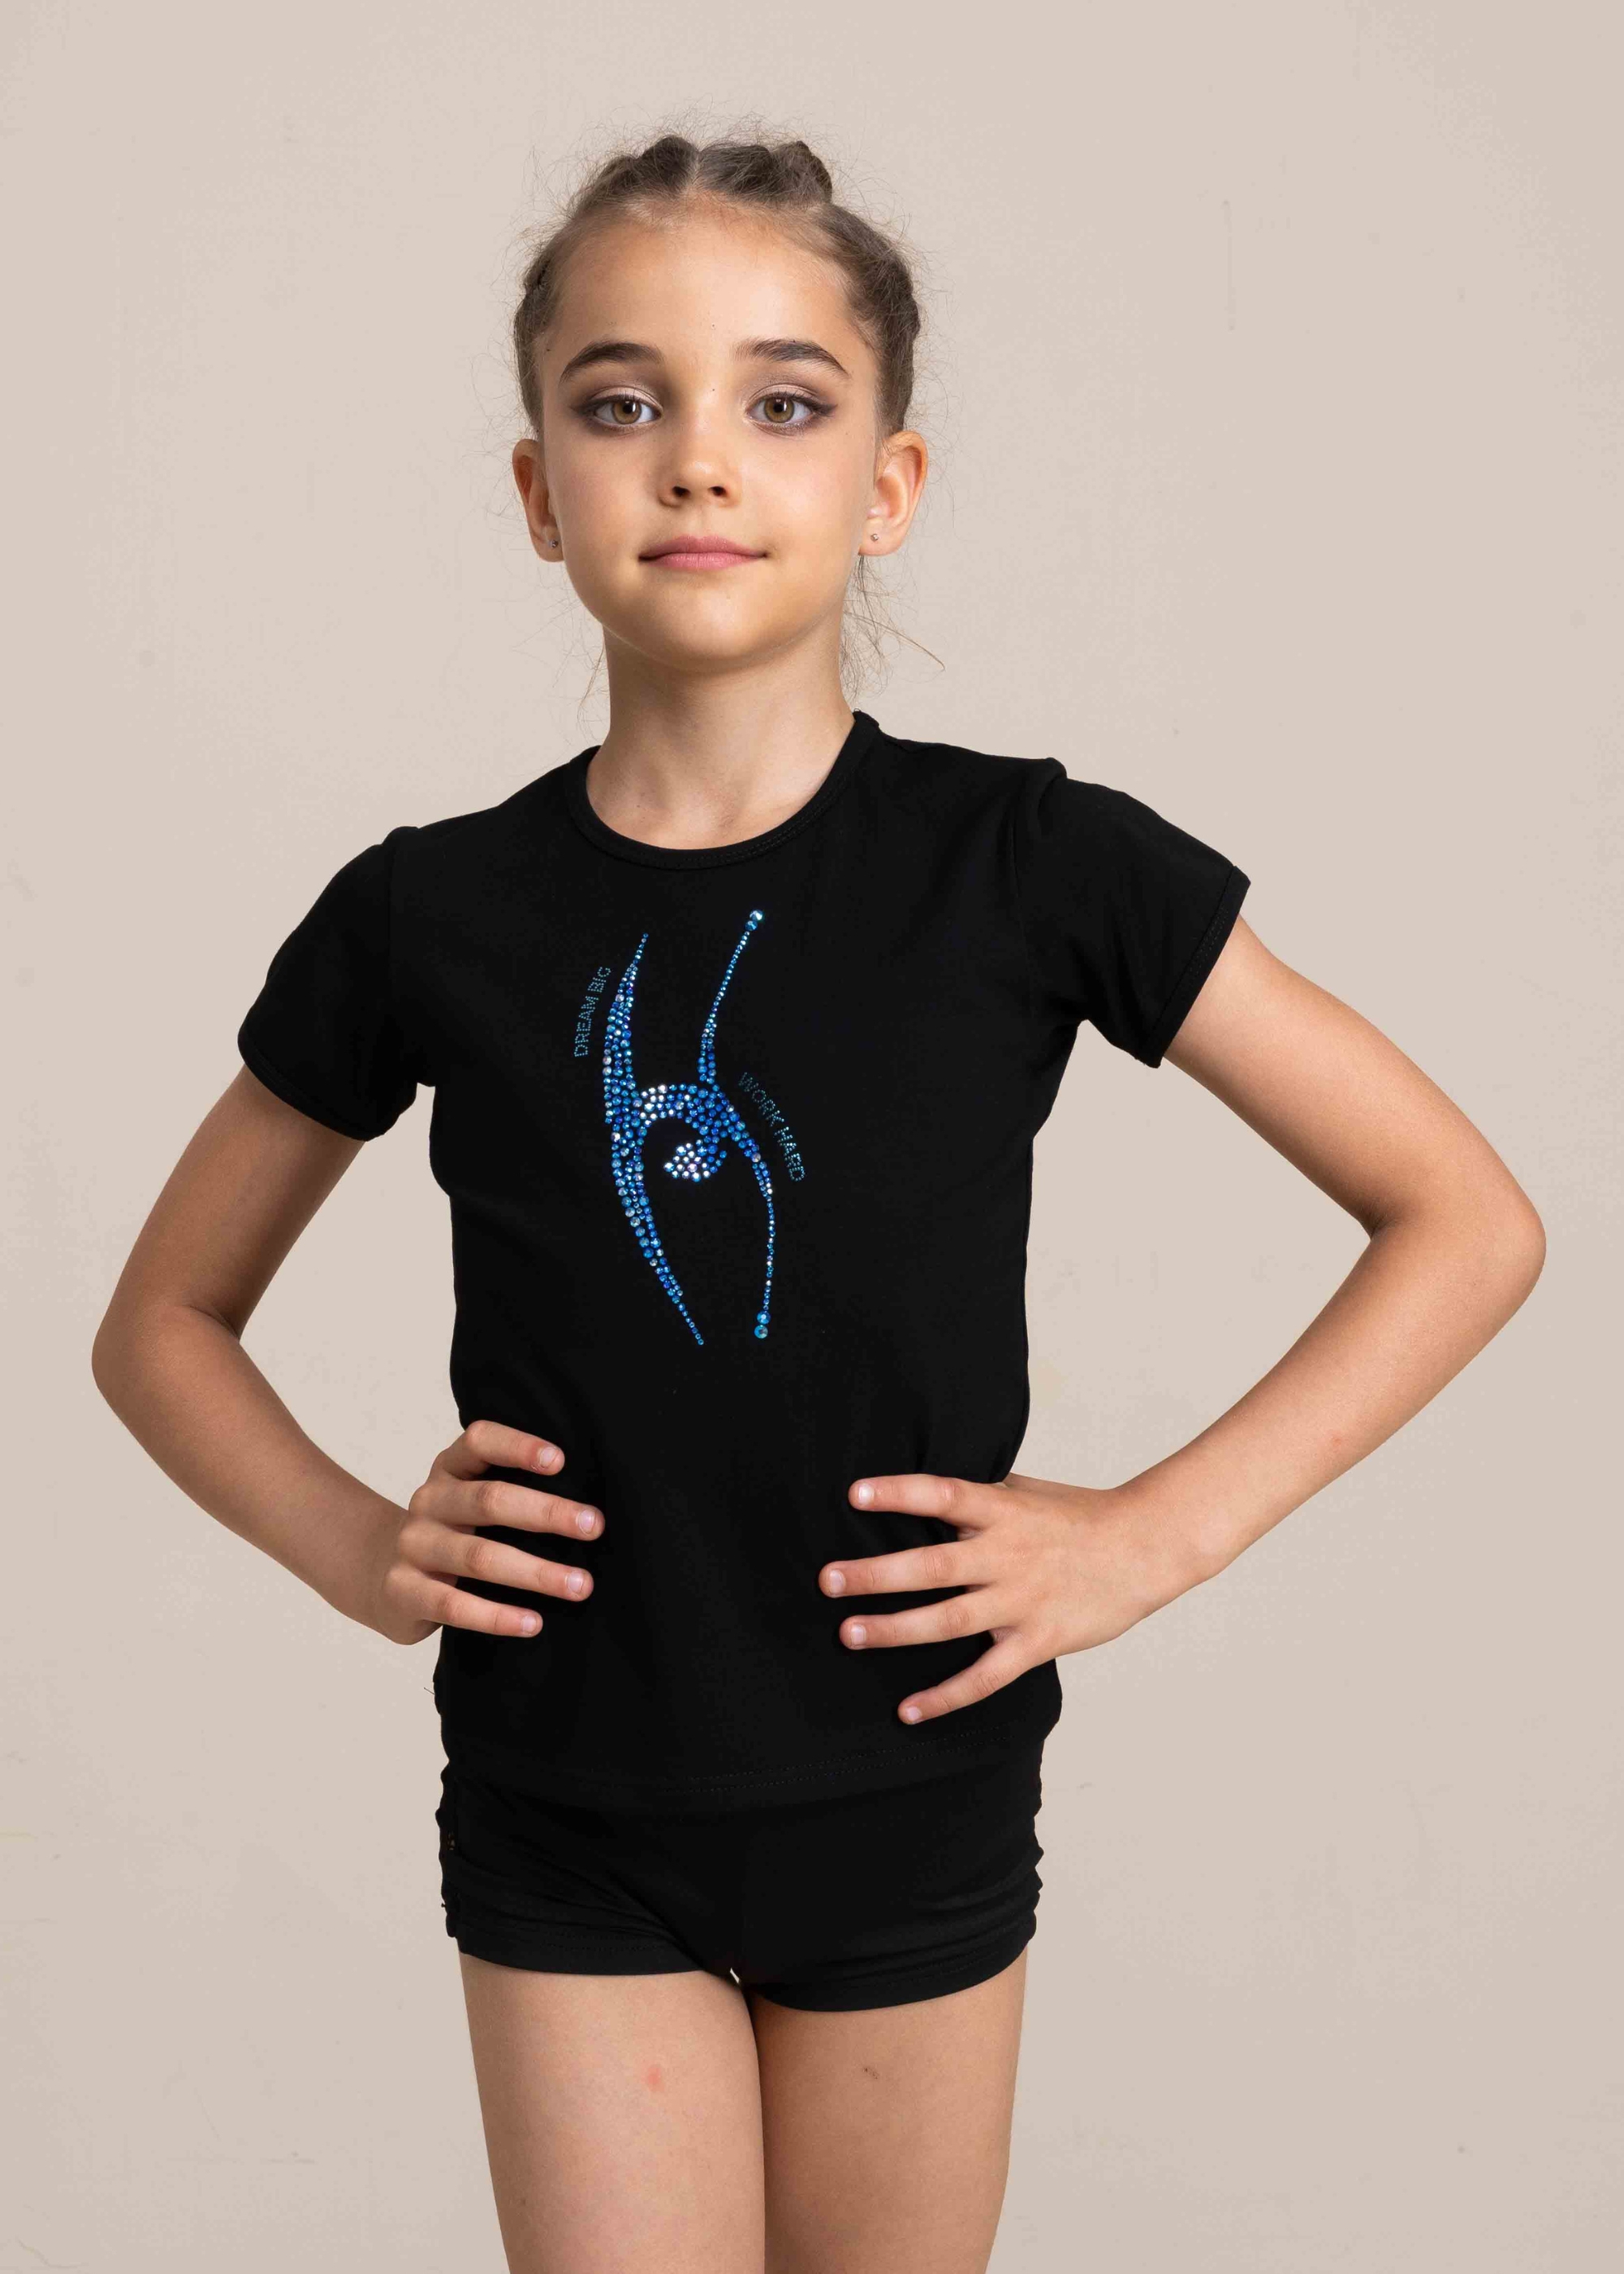 PALOMA T-shirt, gymnast with a clubs by Grand Prix